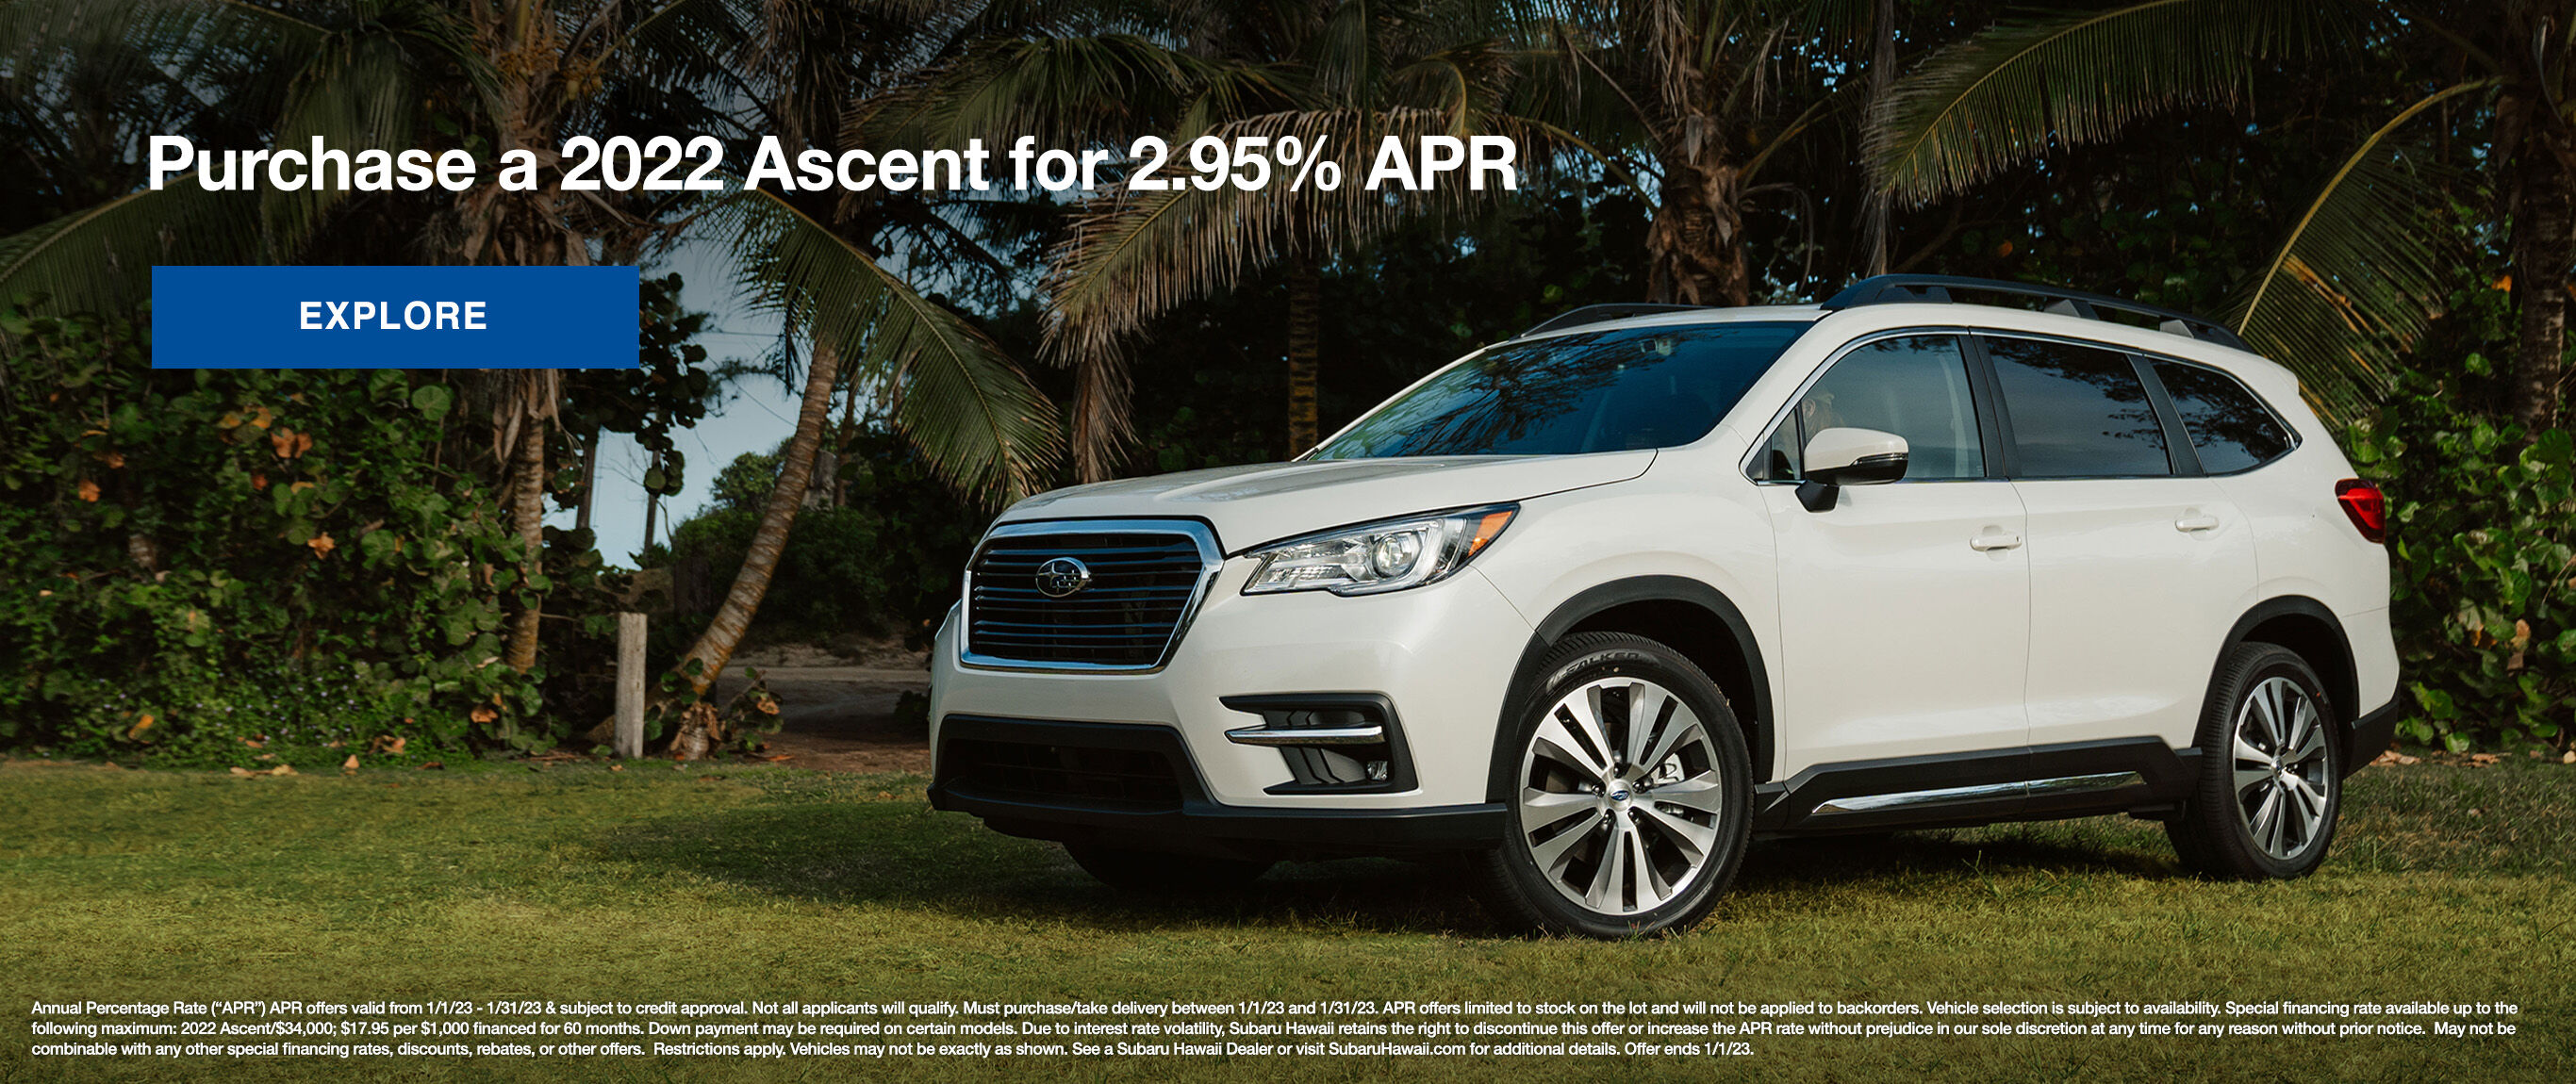 Purchase a 2022 Ascent for 2.95% APR